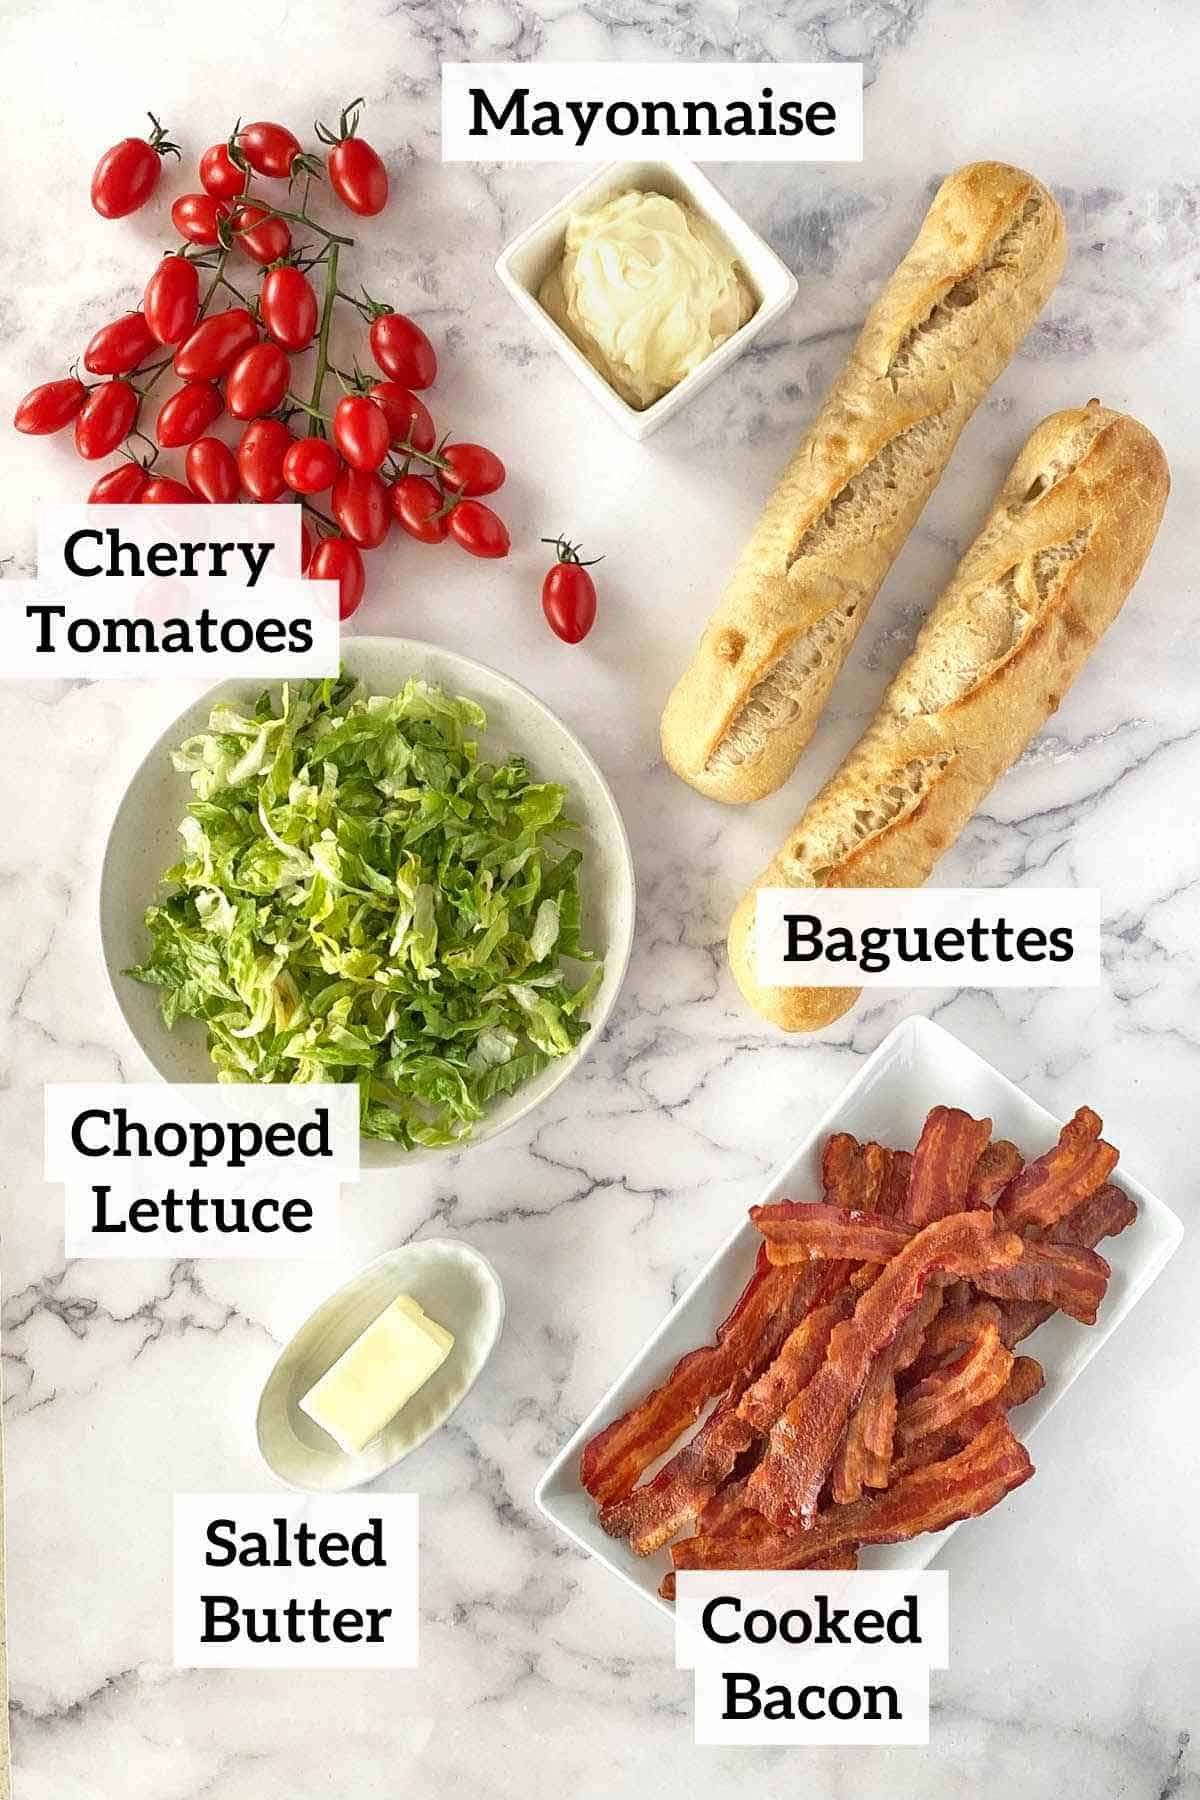 Cherry tomatoes, mayonnaise, baguettes, lettuce, butter and bacon.